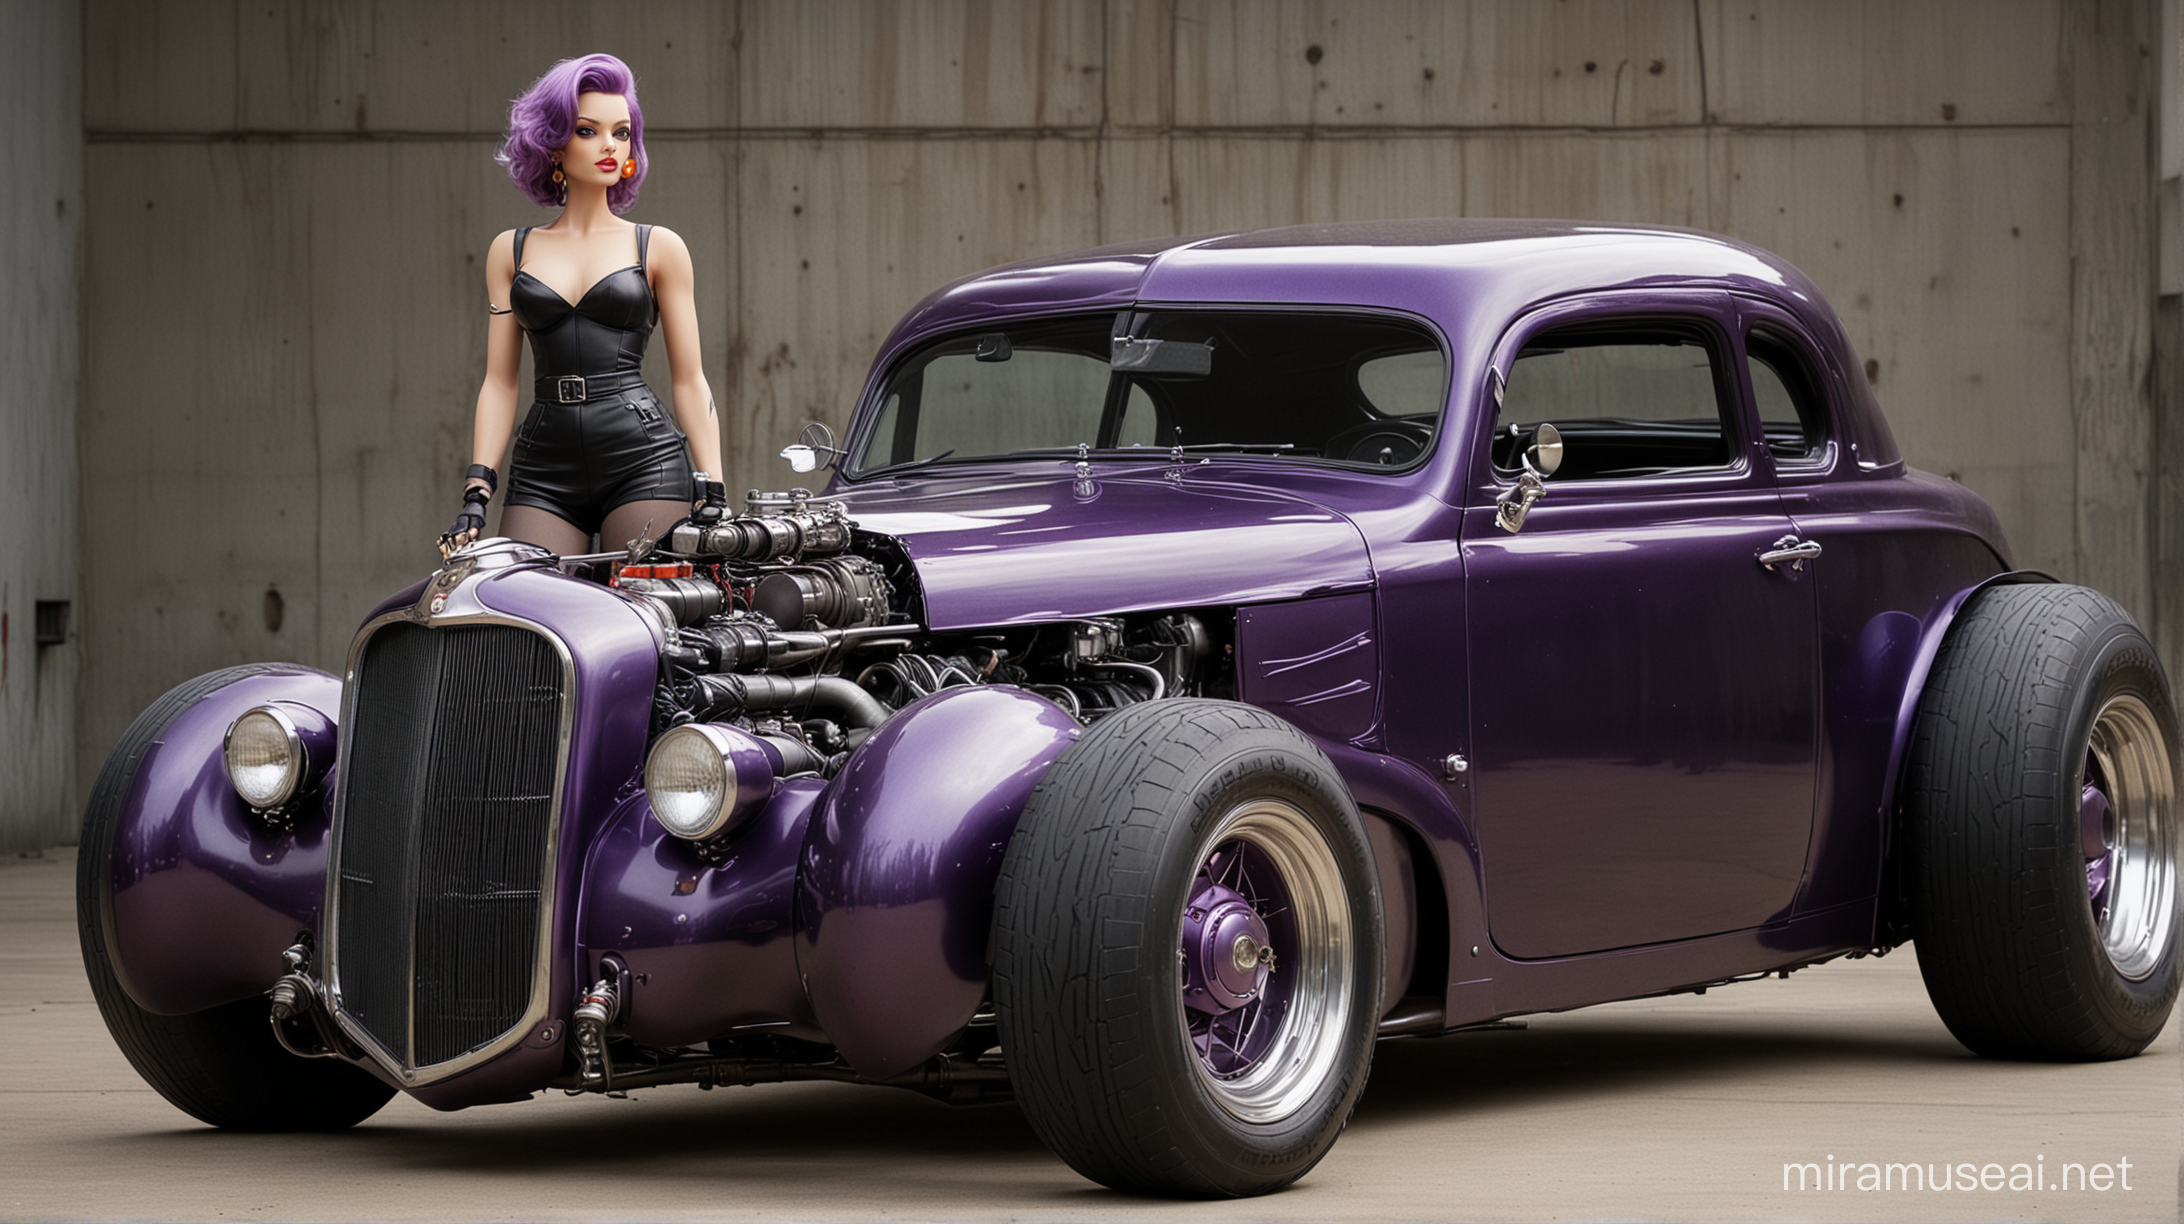 beautiful custom Rat - Rod 1950. 3 - window coupe, with black - purple pearl paint, with fat rear slicks. A super - future, brutal hybrid - mechanical porcelain, love doll. She beauty exquisite. Wearing the most beautiful silk. She stands at a distance, separated from the car. Positioned closer to the viewer. She is captured by the wide 35mm lens, creating a sense of depth. Art by Saturno Butto. *